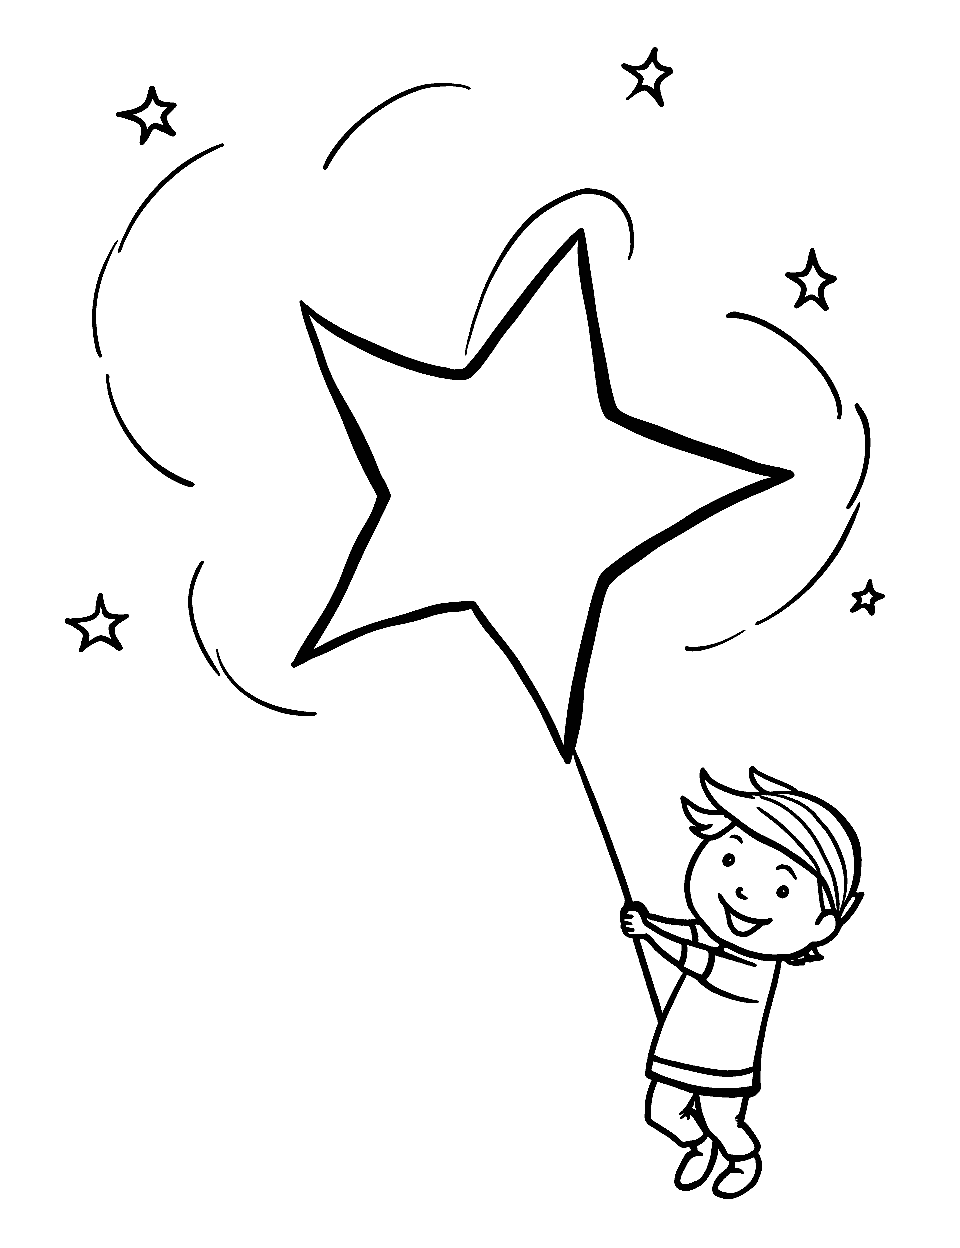 Flying Star Kite Coloring Page - A kid flying a kite shaped like a star.